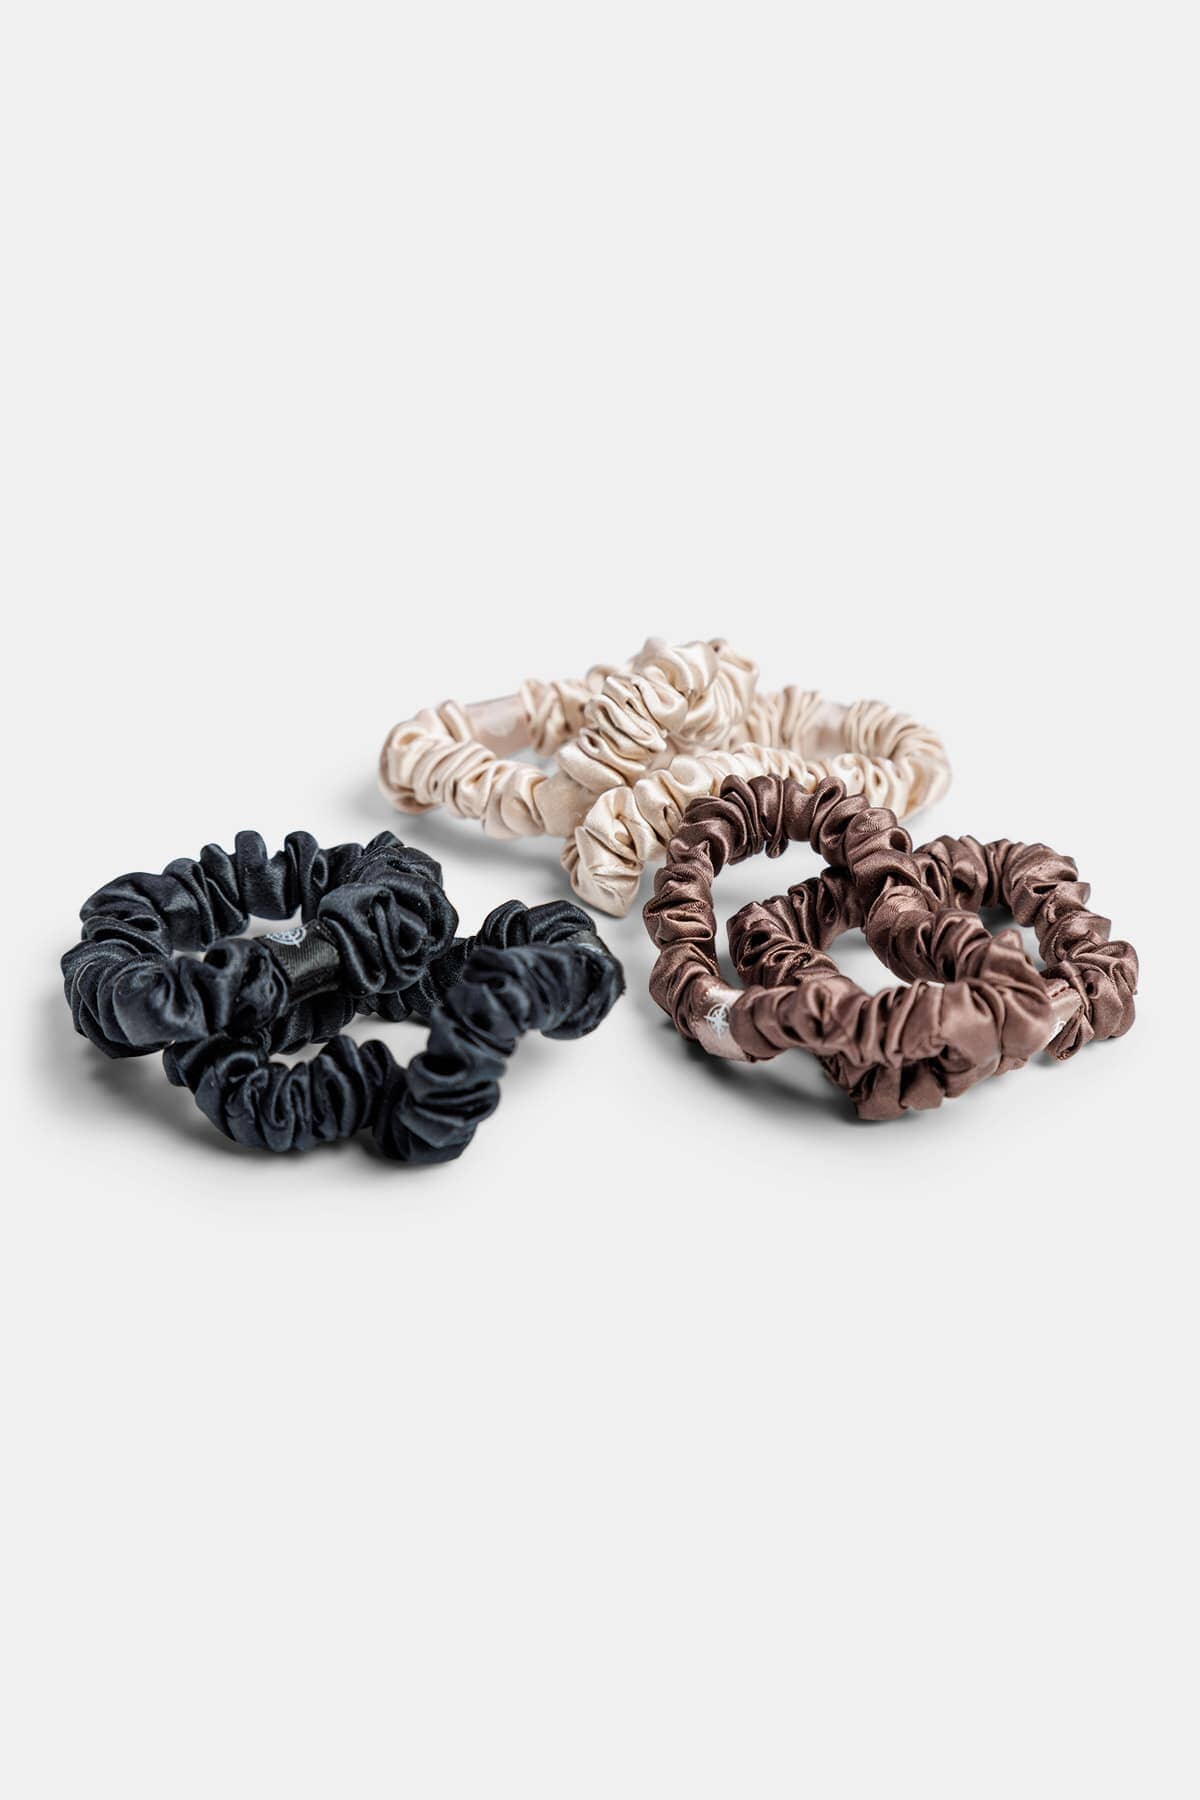 100% Pure Mulberry Silk Hair Scrunchies with Gift Box - Set of 6 Skinny Hair Ties Womens>Beauty>Hair Care Fishers Finery Taupe-Chocolate-Black 